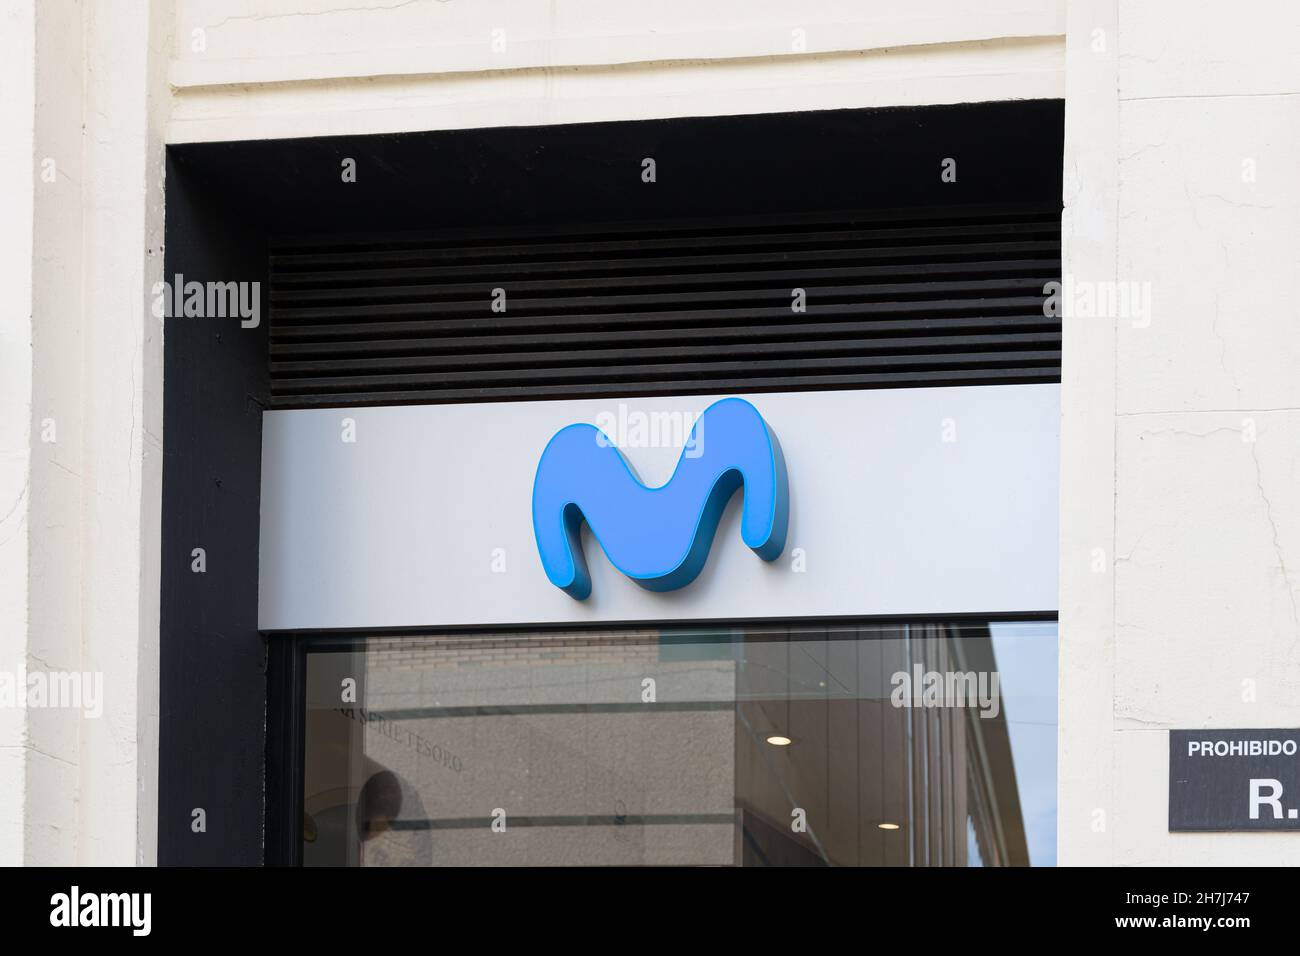 VALENCIA, SPAIN - OCTOBER 19, 2021: Movistar is a major telecommunications provider owned by Telefónica Stock Photo